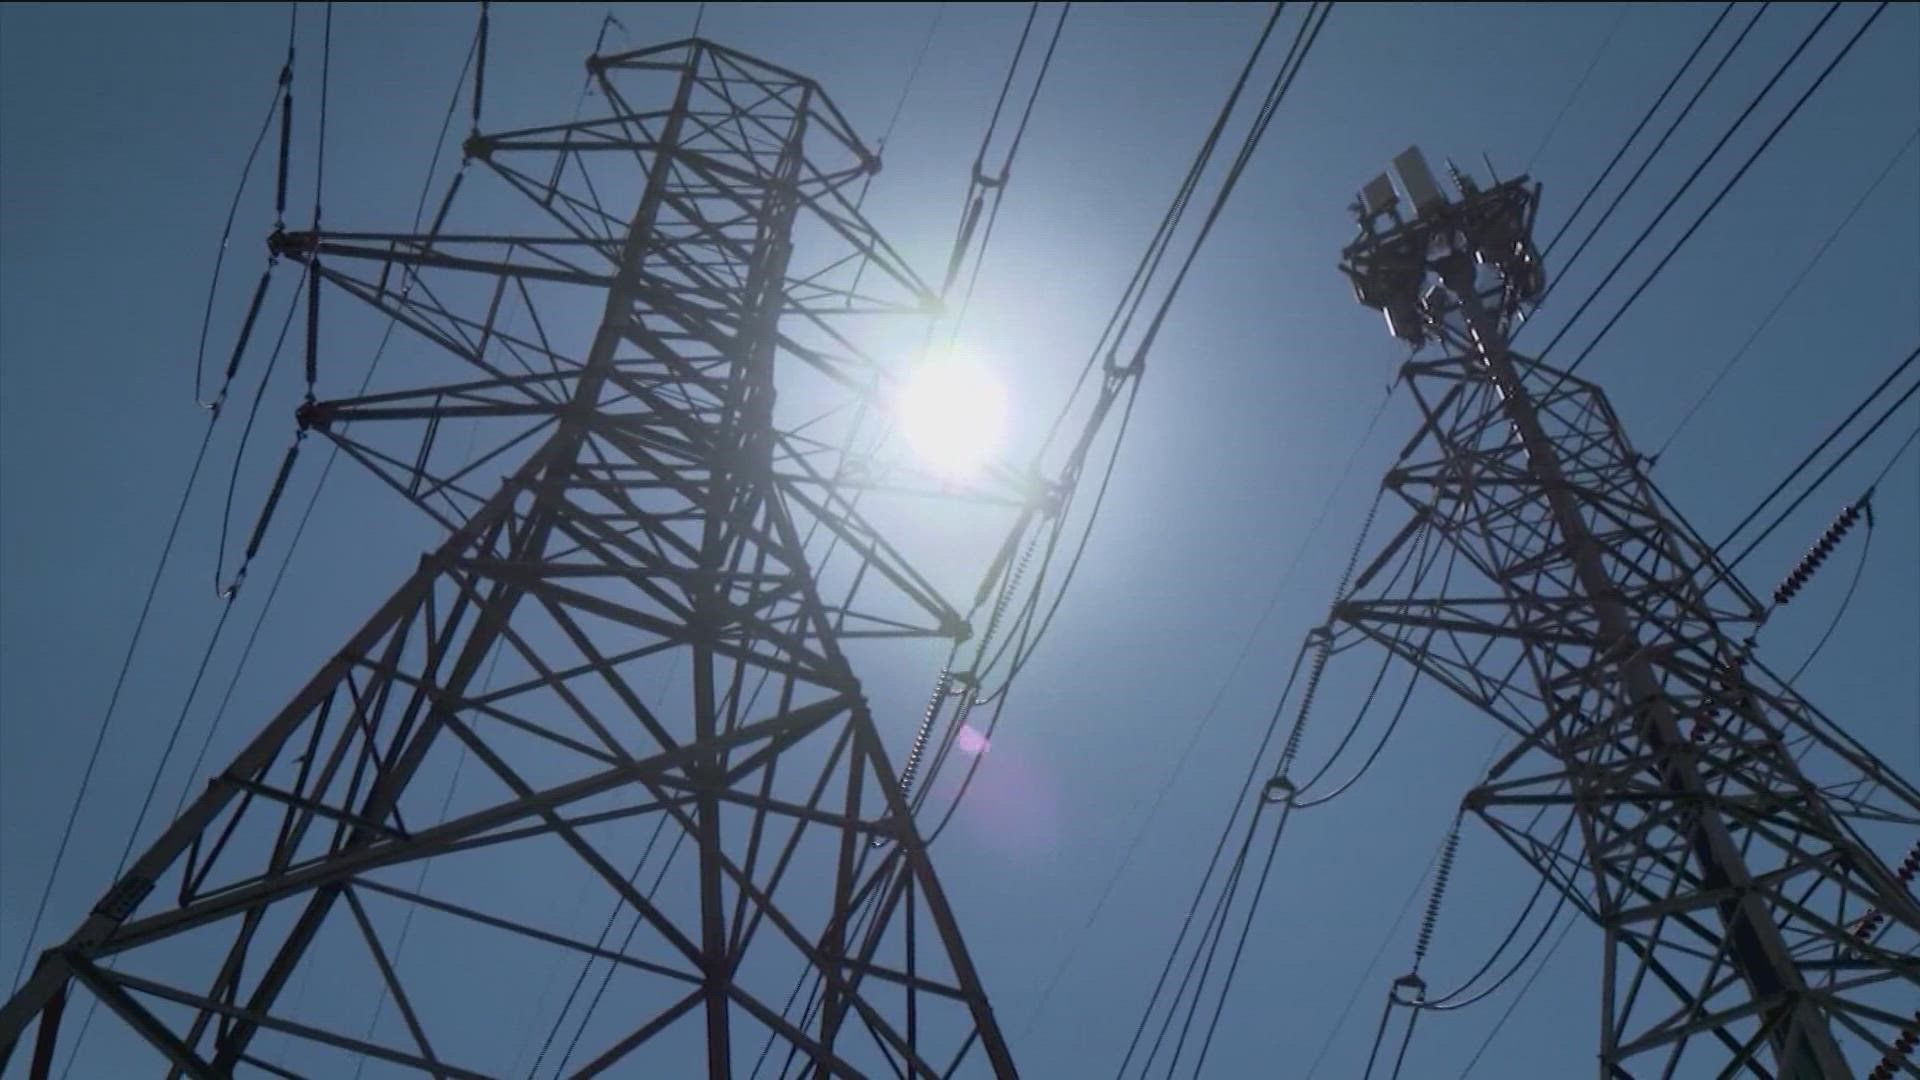 The Sunset Commission reviews state agencies and a new report found several issues with the state's electric grid regulator.